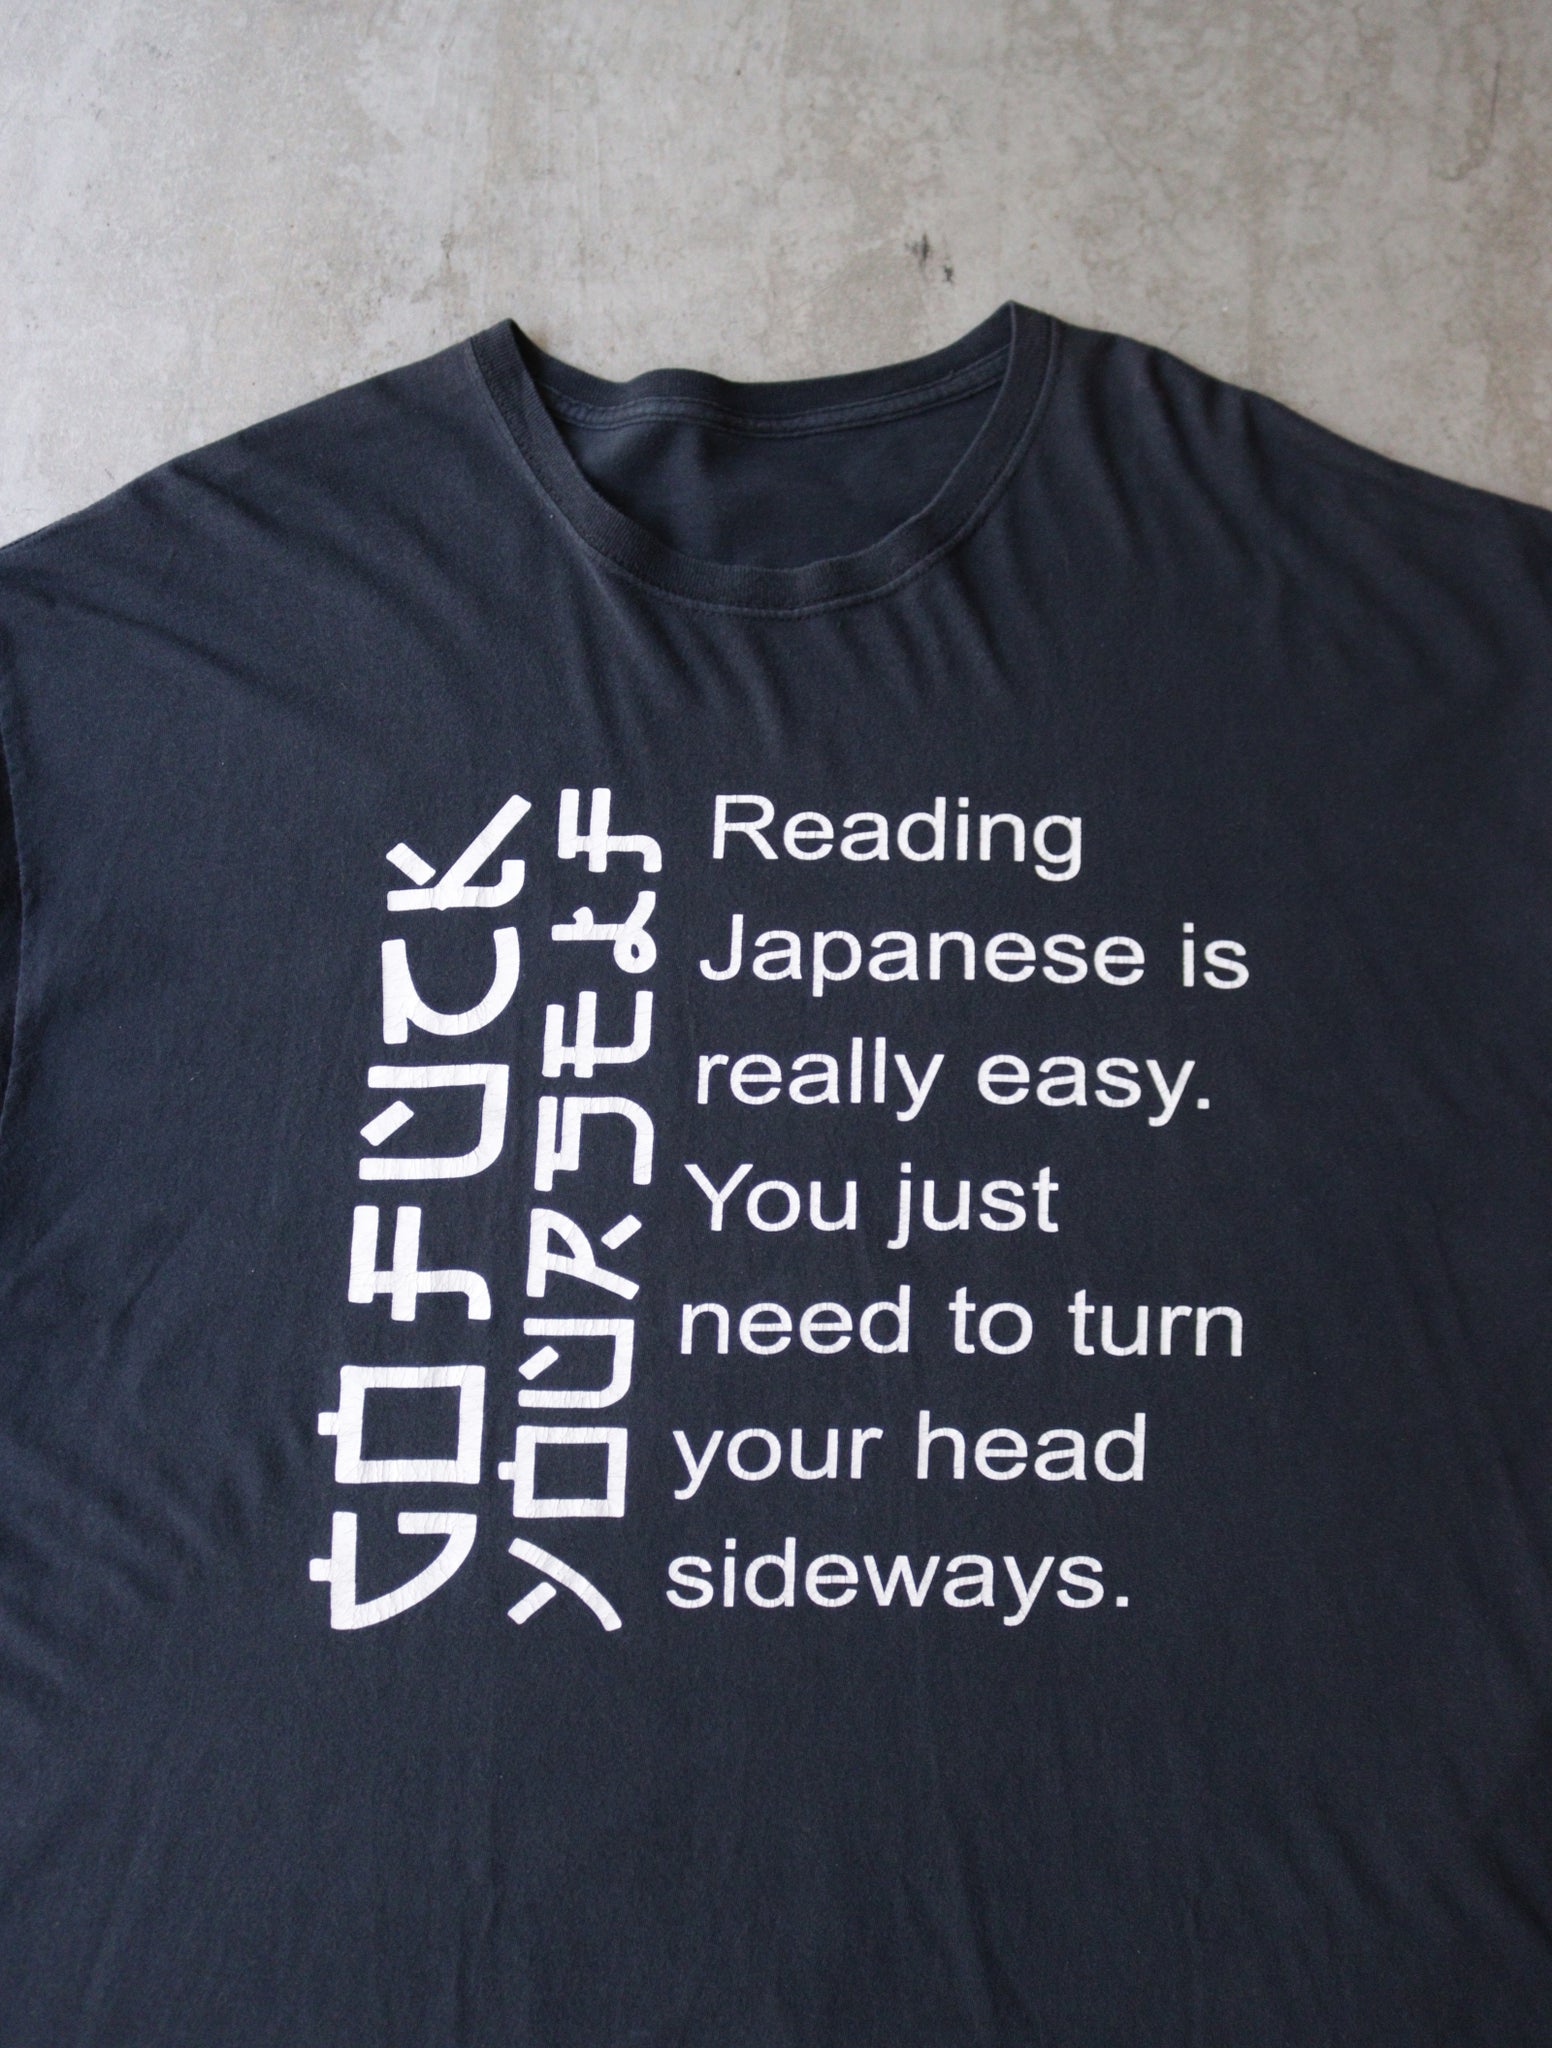 2000S READING JAPANESE IS EASY TEE